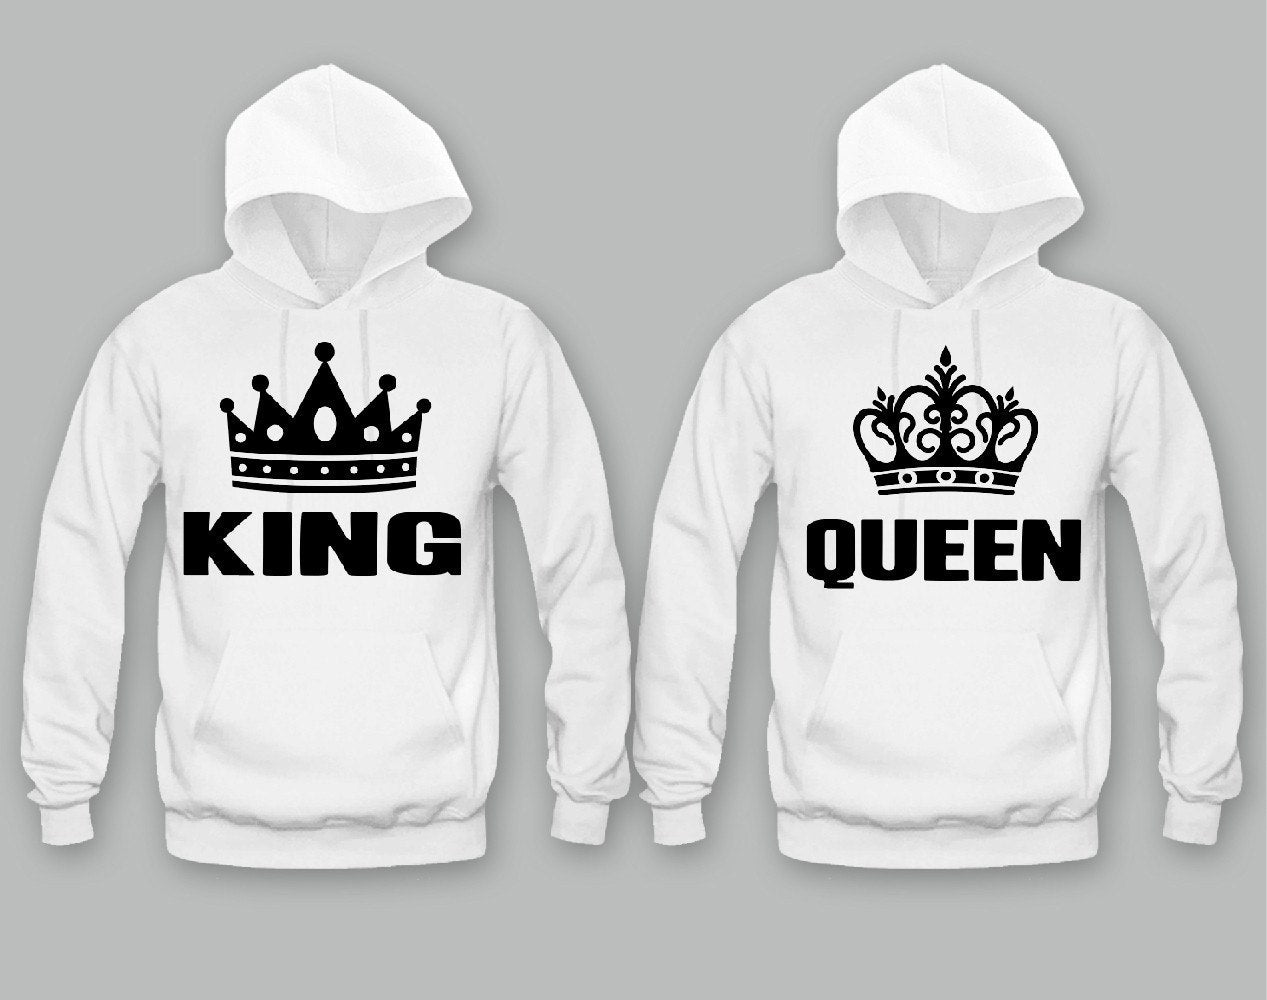 King and Queen Unisex  Couple  Matching  Hoodies 